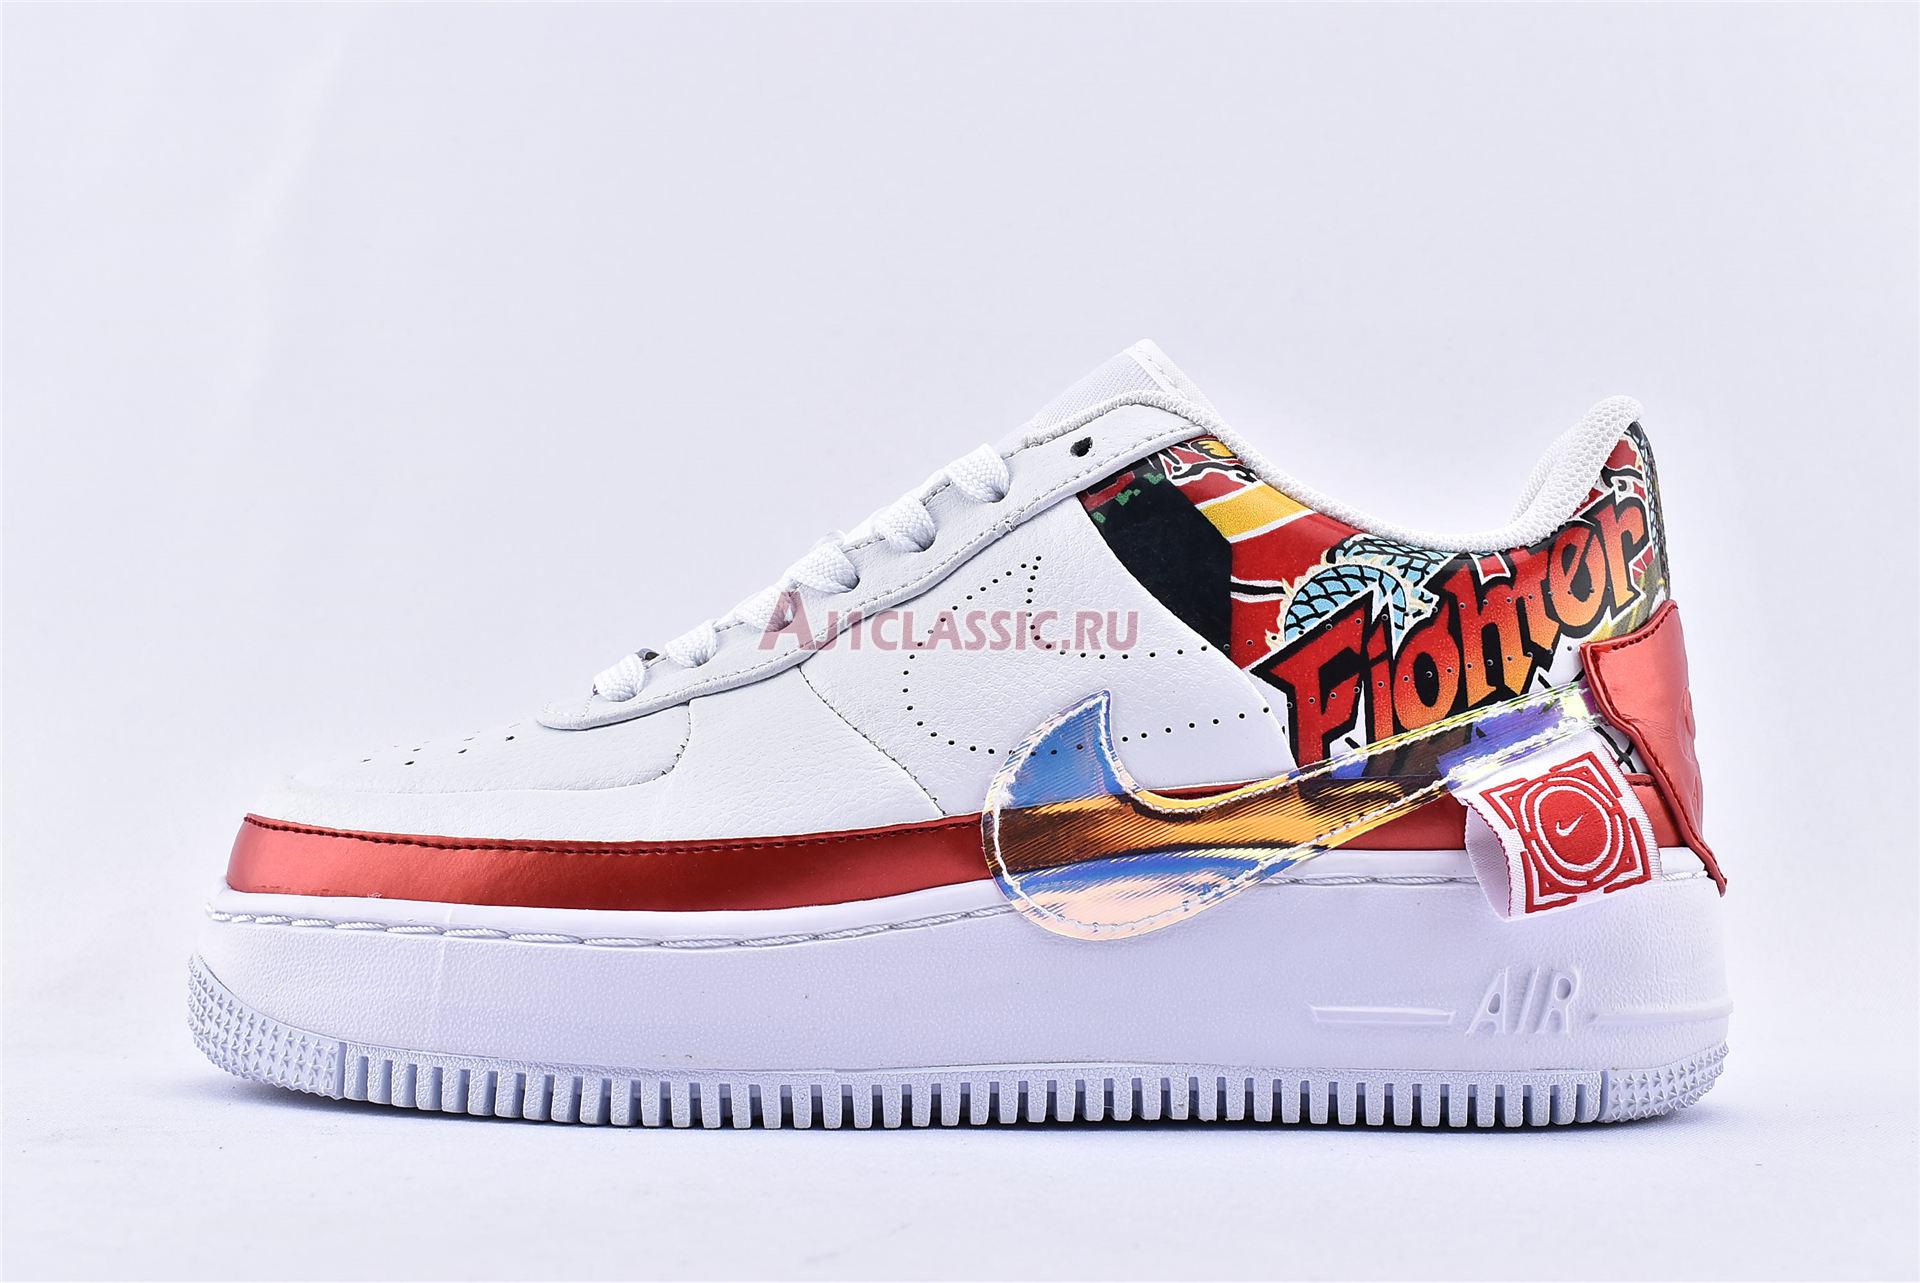 Nike Wmns Air Force 1 Jester XX FIBA 2019 China Exclusive CK5738-191 White/Multi-Color/White/Ember Glow Sneakers